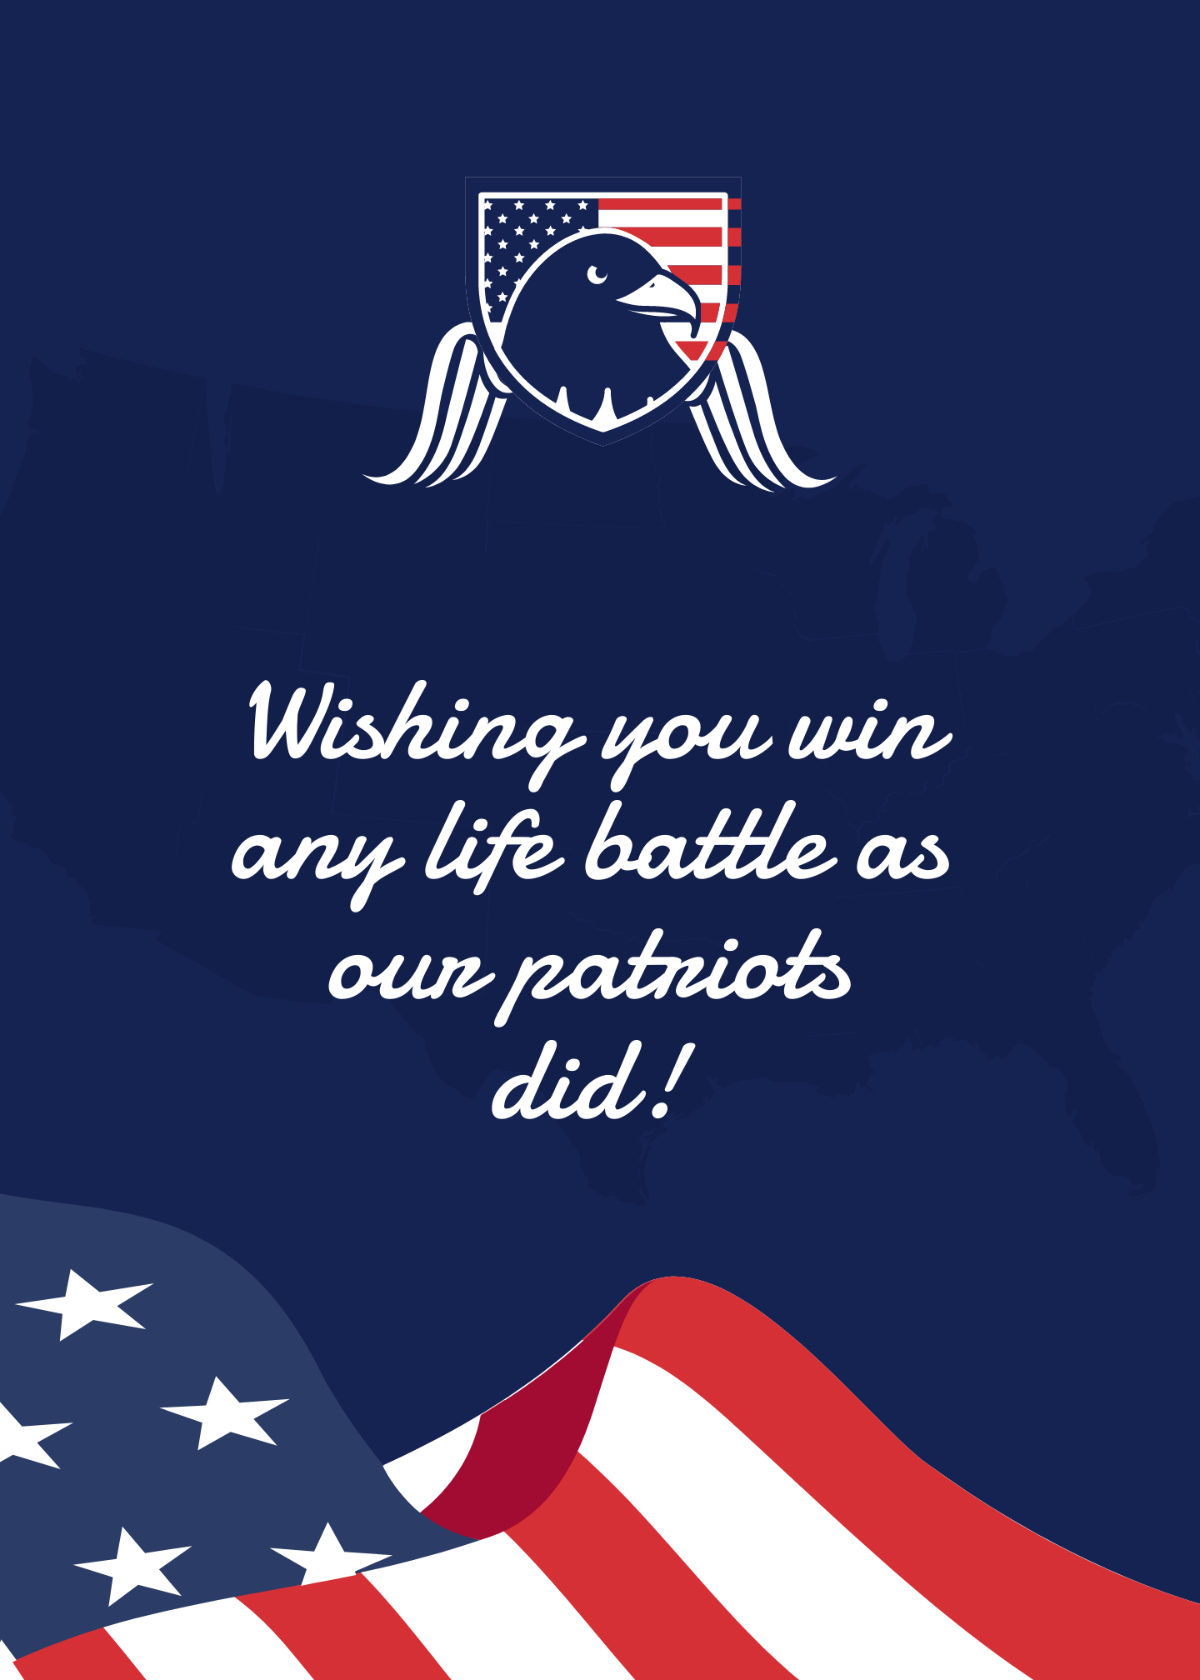 Patriots' Day Wishes For Friend Template